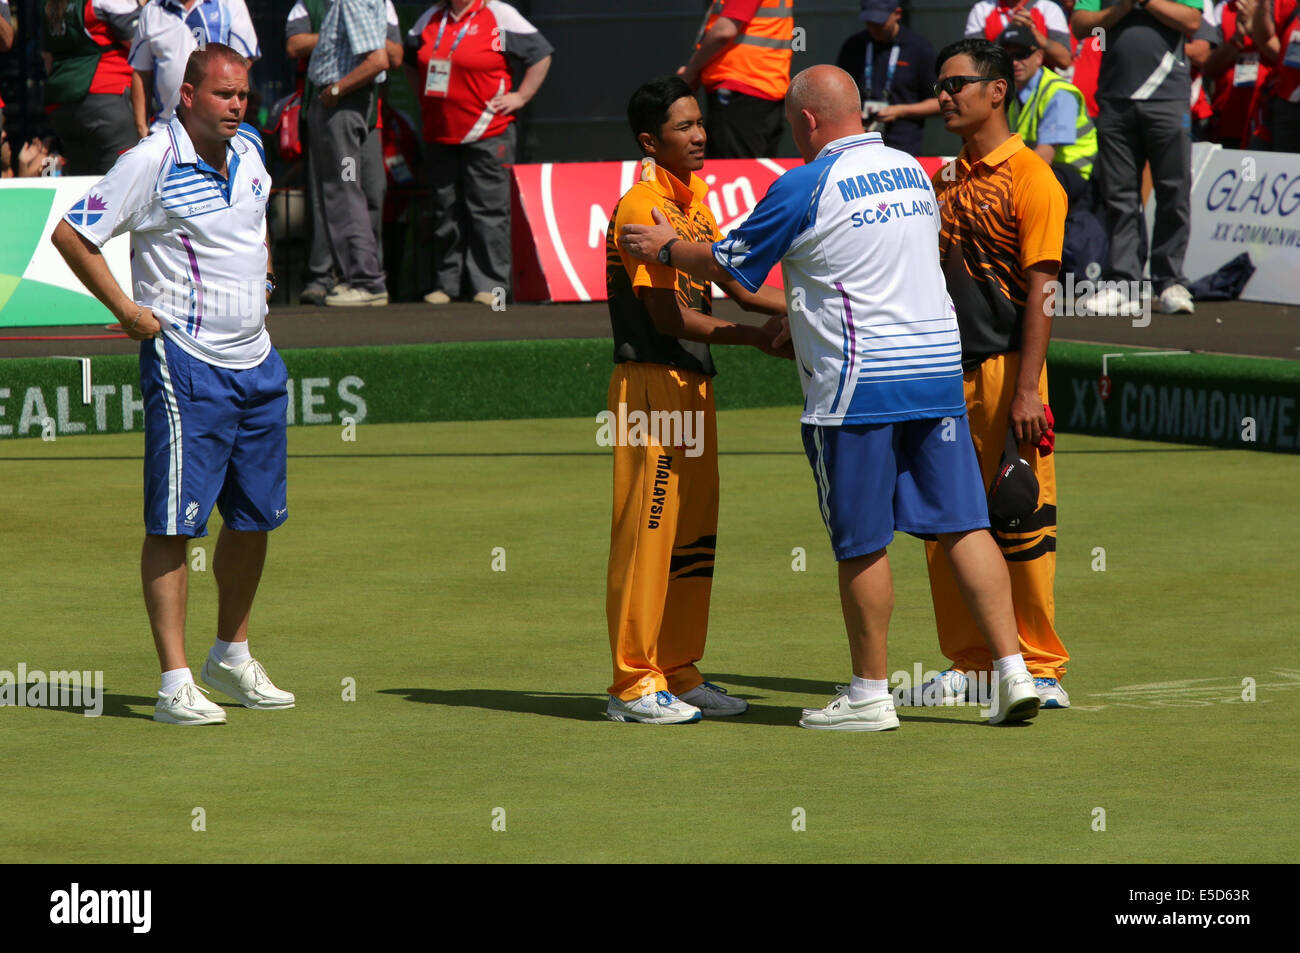 Kelvingrove Lawn Bowls Centre, Glasgow, Scotland, UK, Monday, 28th July, 2014. Players shake hands at the end of the Men's Lawn Bowls Pairs Final between Scotland's Paul Foster and Alex Marshall and Malaysia's Muhammad Hizlee Abdul Rais and Fairul Izwan Abd Muin which Scotland won at the Glasgow 2014 Commonwealth Games Stock Photo